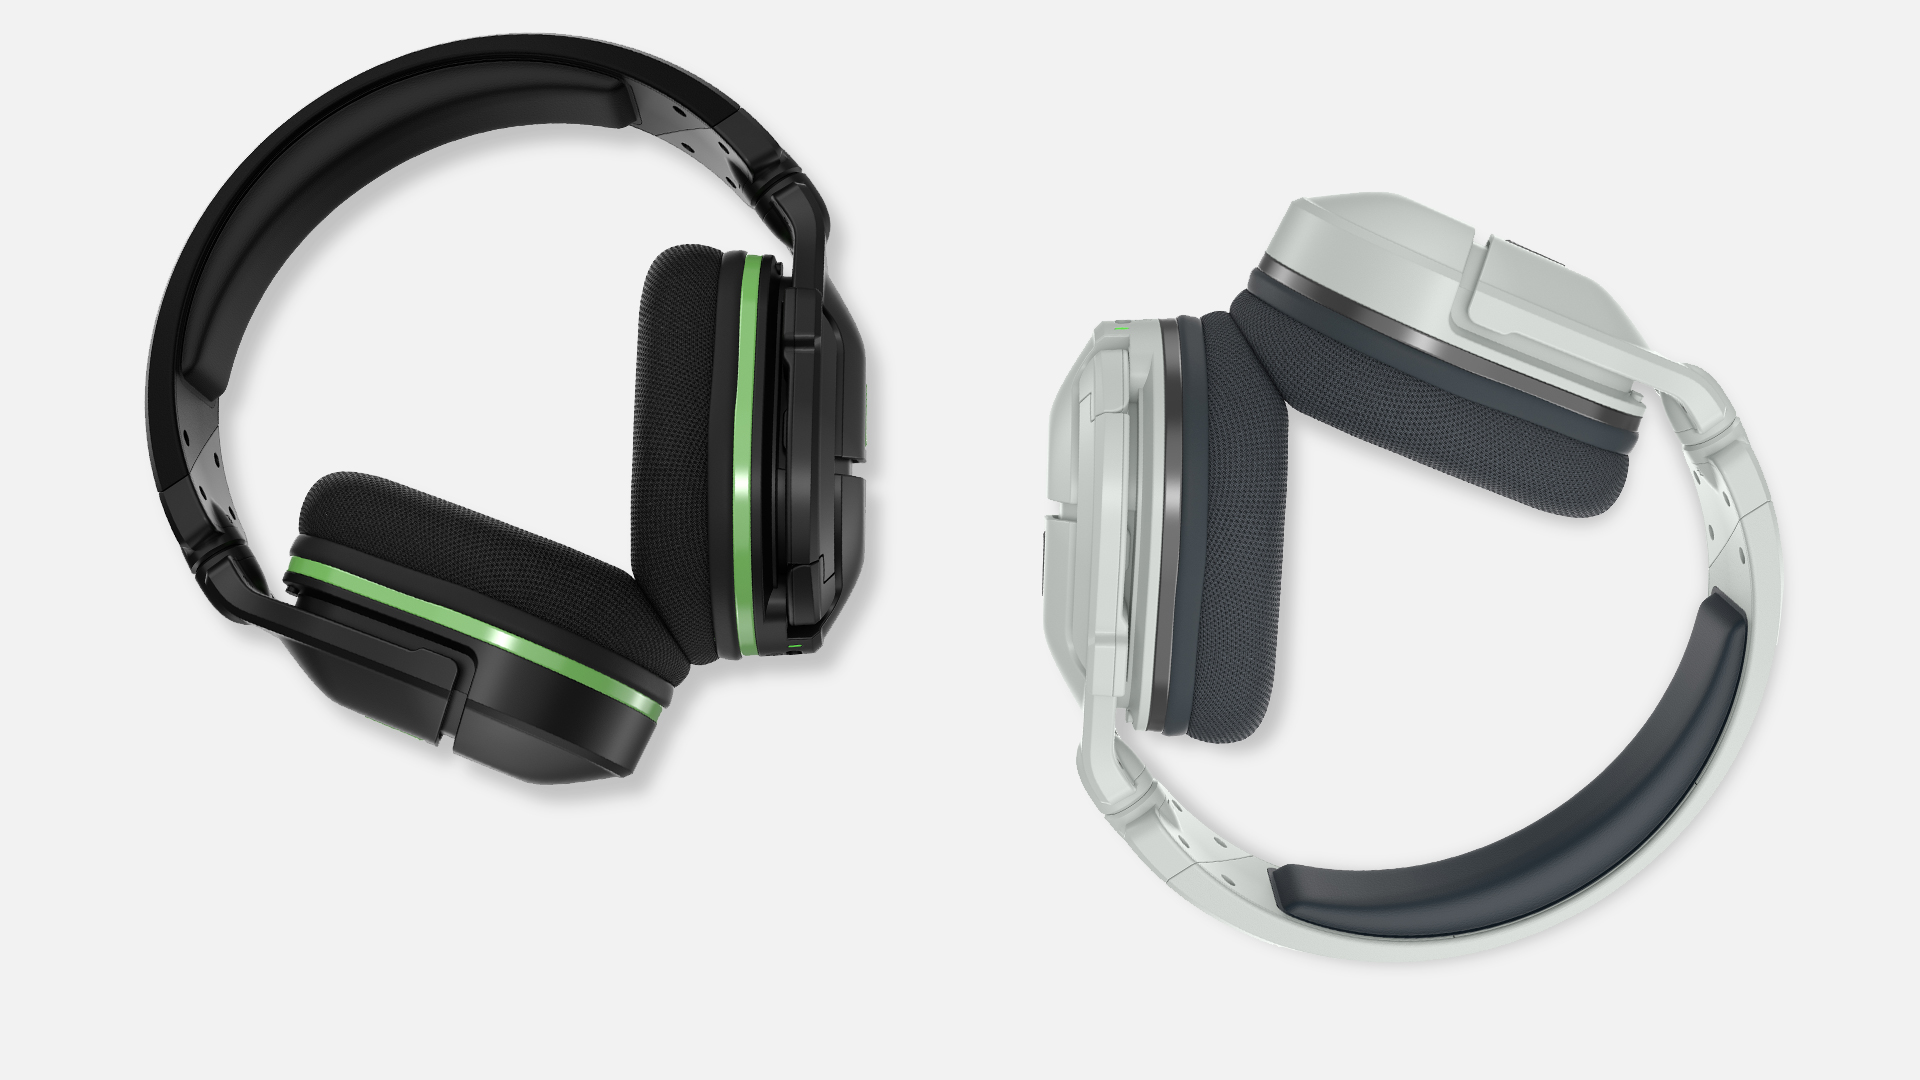 turtle beach stealth 600 wireless headset for xbox one